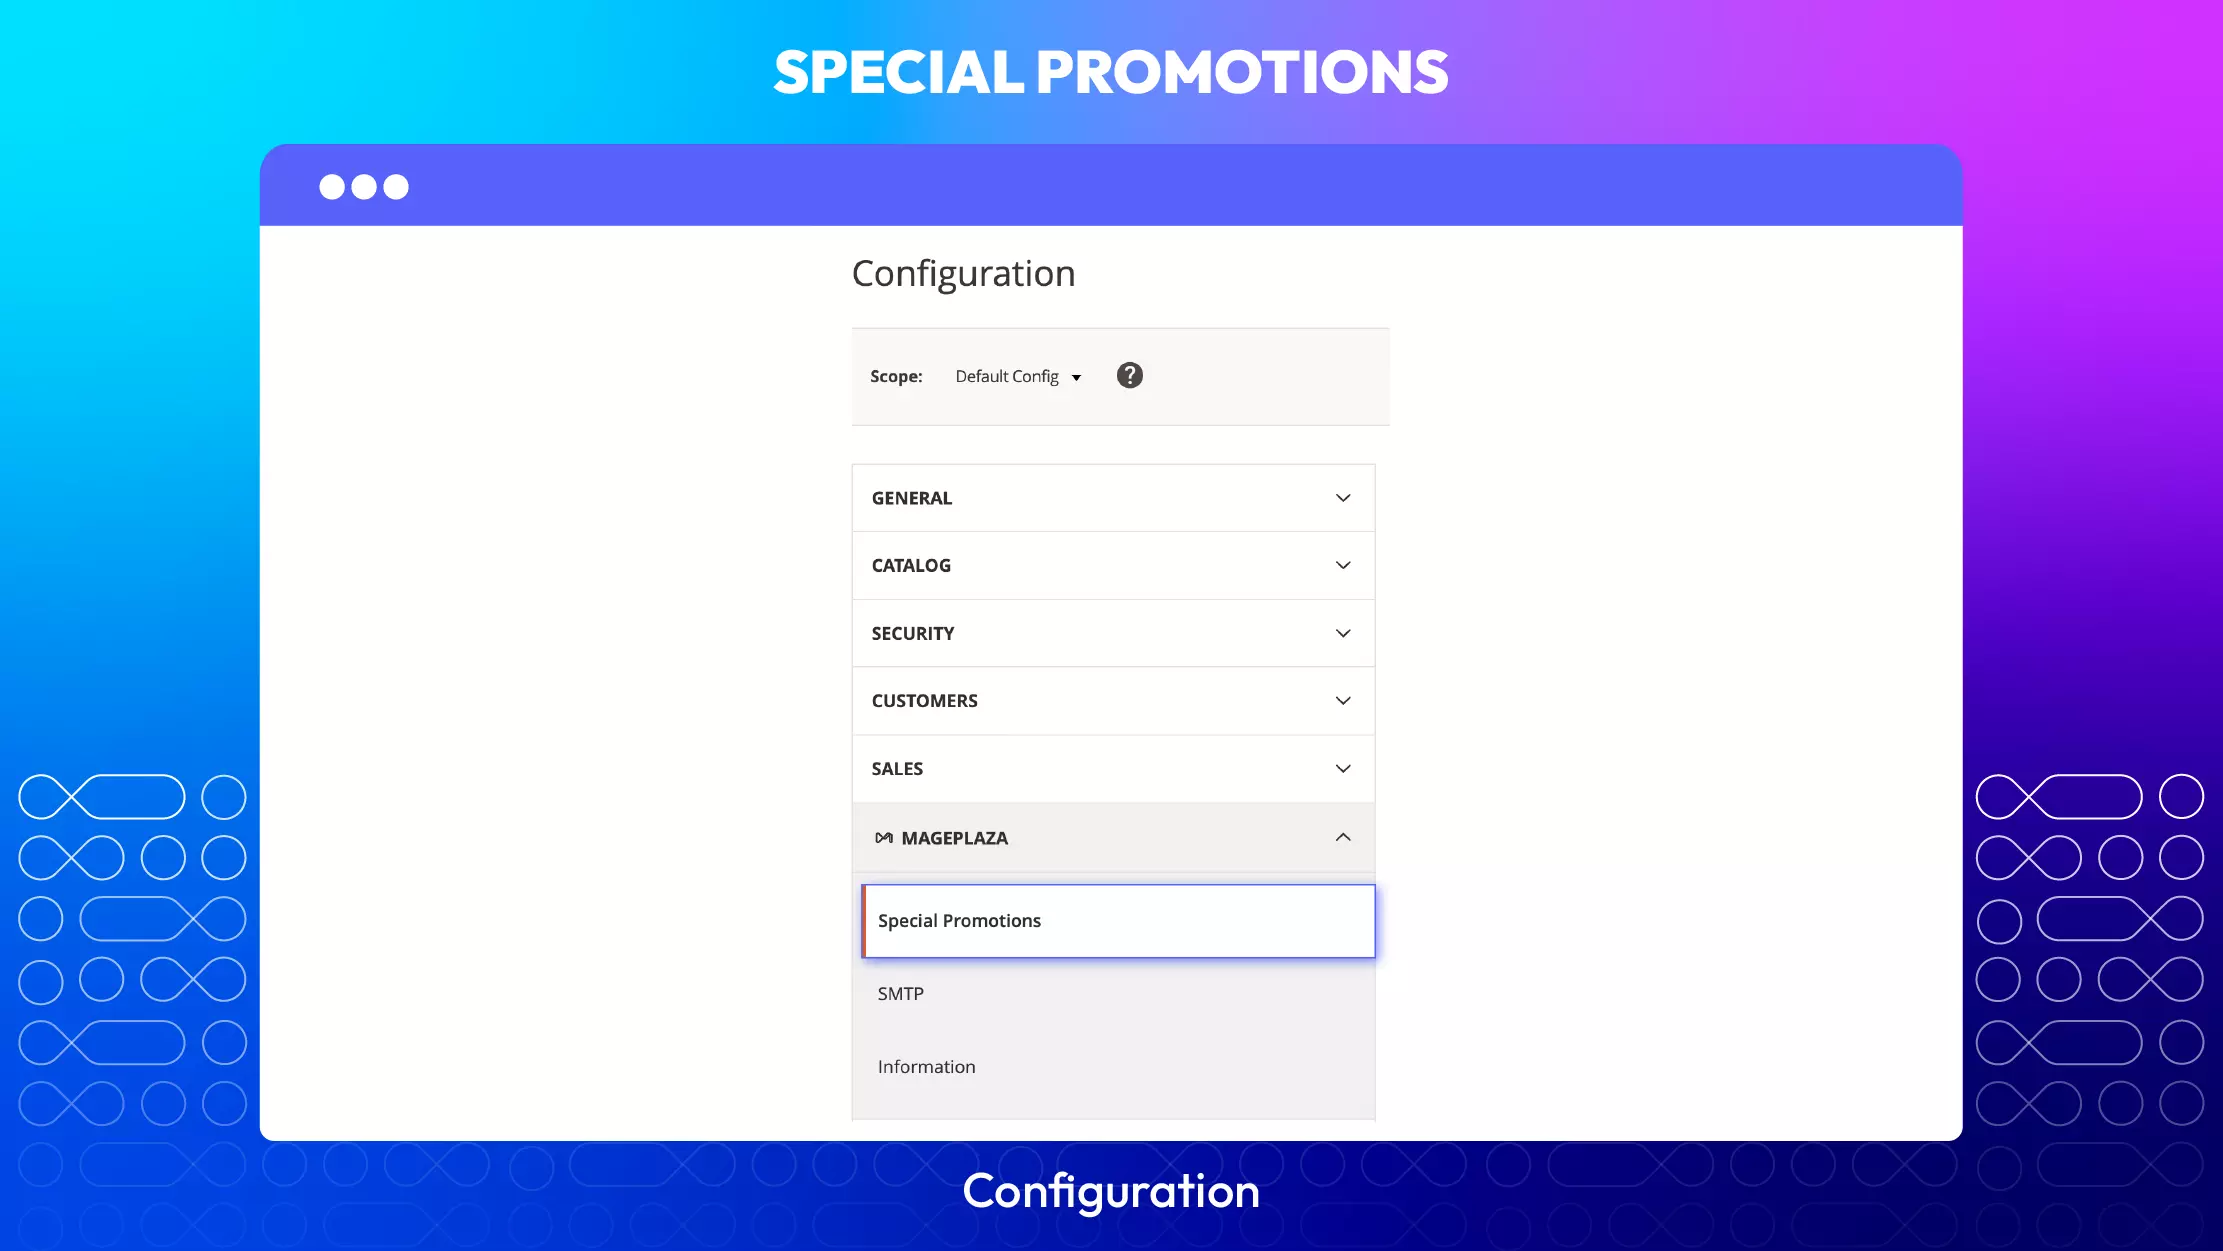 https://cdn2.mageplaza.com/mp/assets/img/extensions-new/special-promotions/SS1.webp